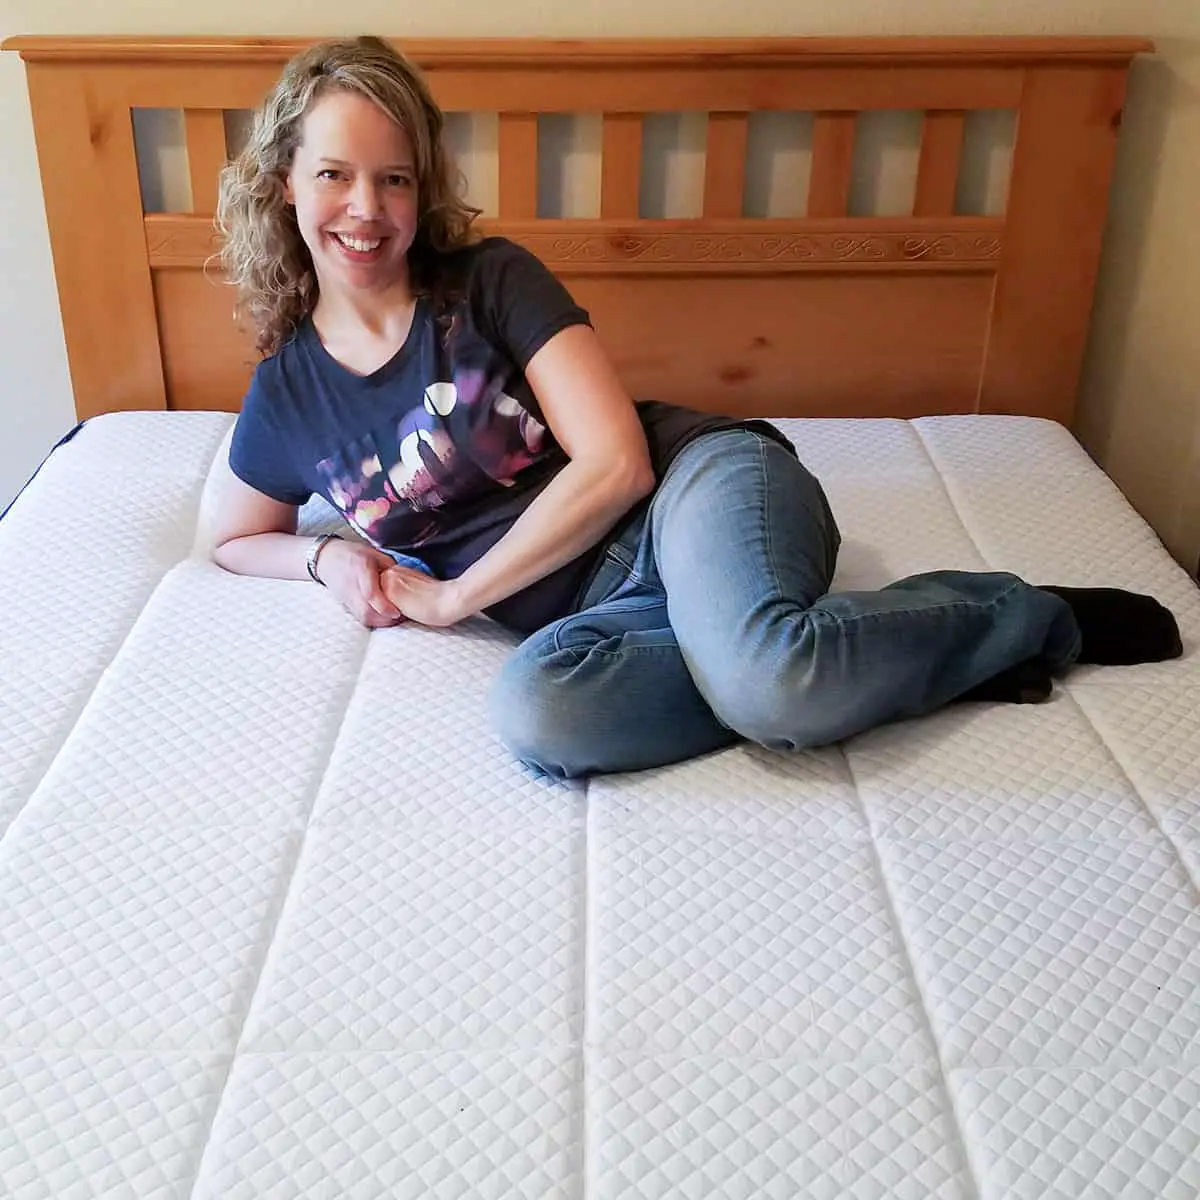 Nectar Mattress Reviews: My Completely Honest Review of My Nectar Sleep ...